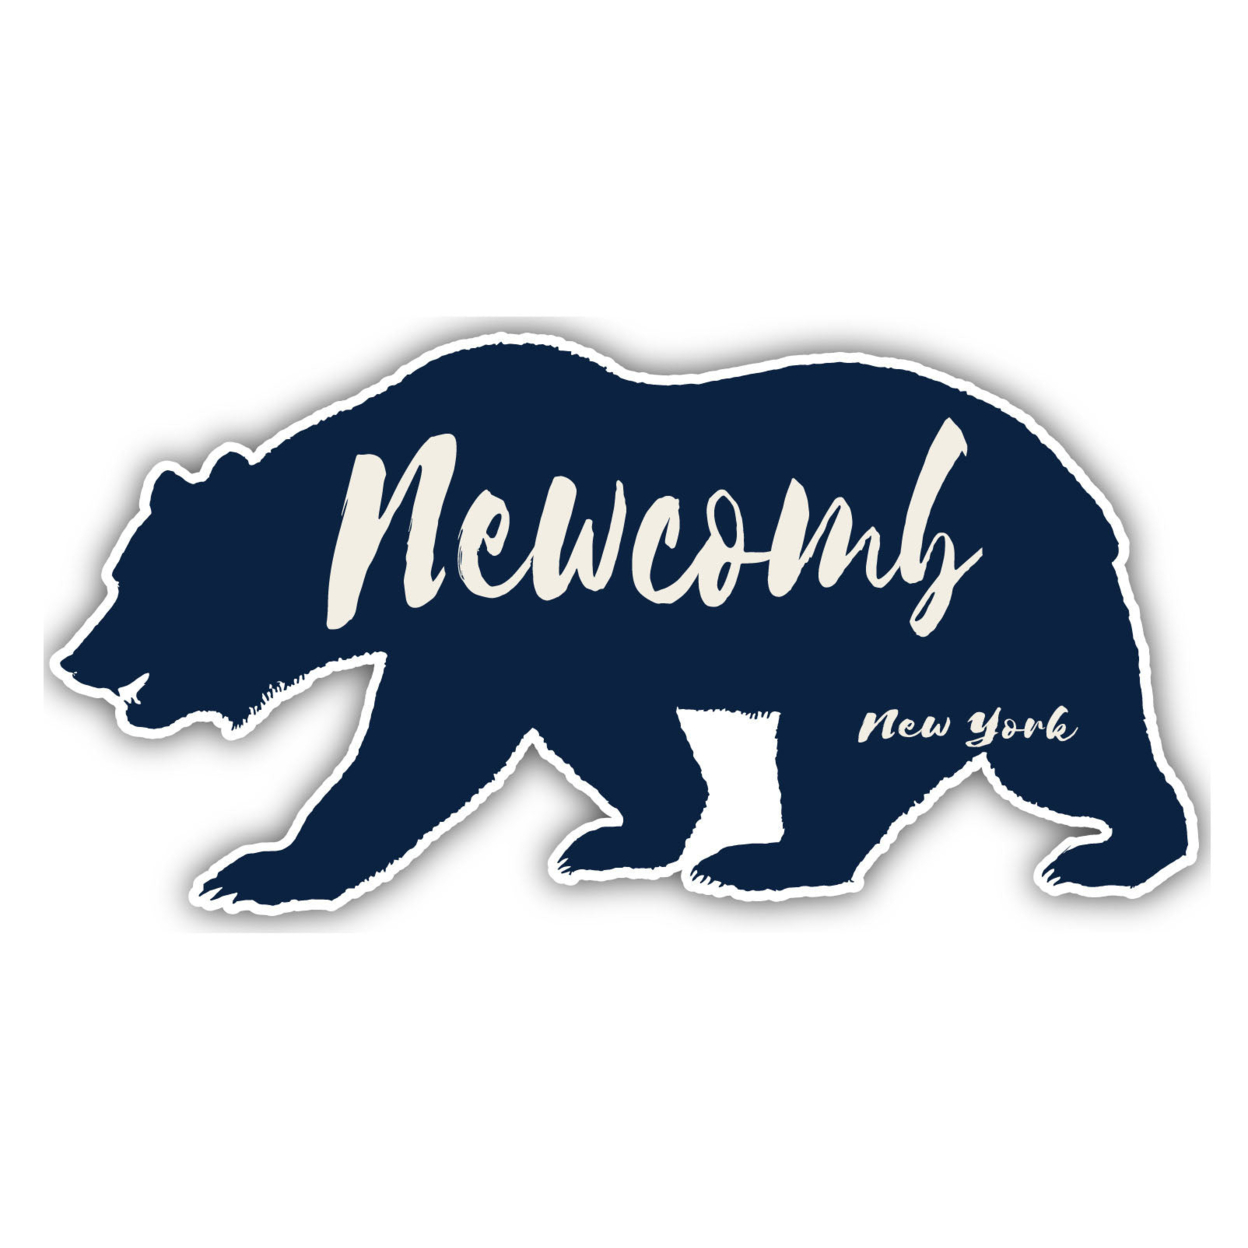 Newcomb New York Souvenir Decorative Stickers (Choose Theme And Size) - Single Unit, 4-Inch, Bear